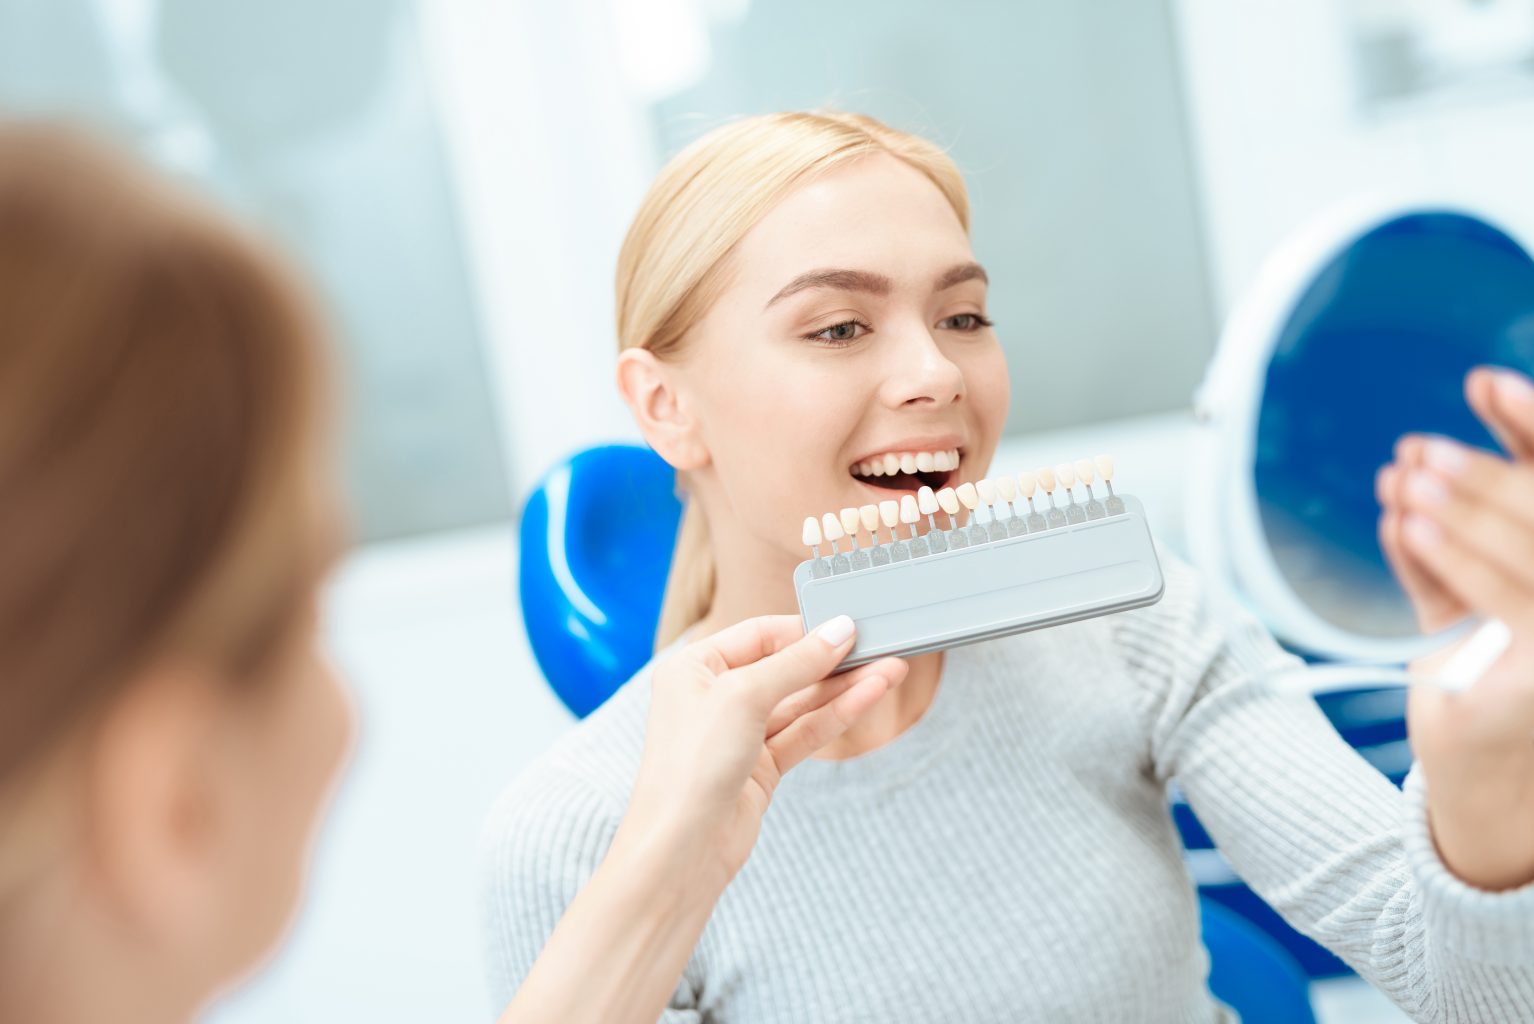 A Woman Came To See A Dentist For Teeth Whitening. The Dentist Determines The Color Of Her Teeth